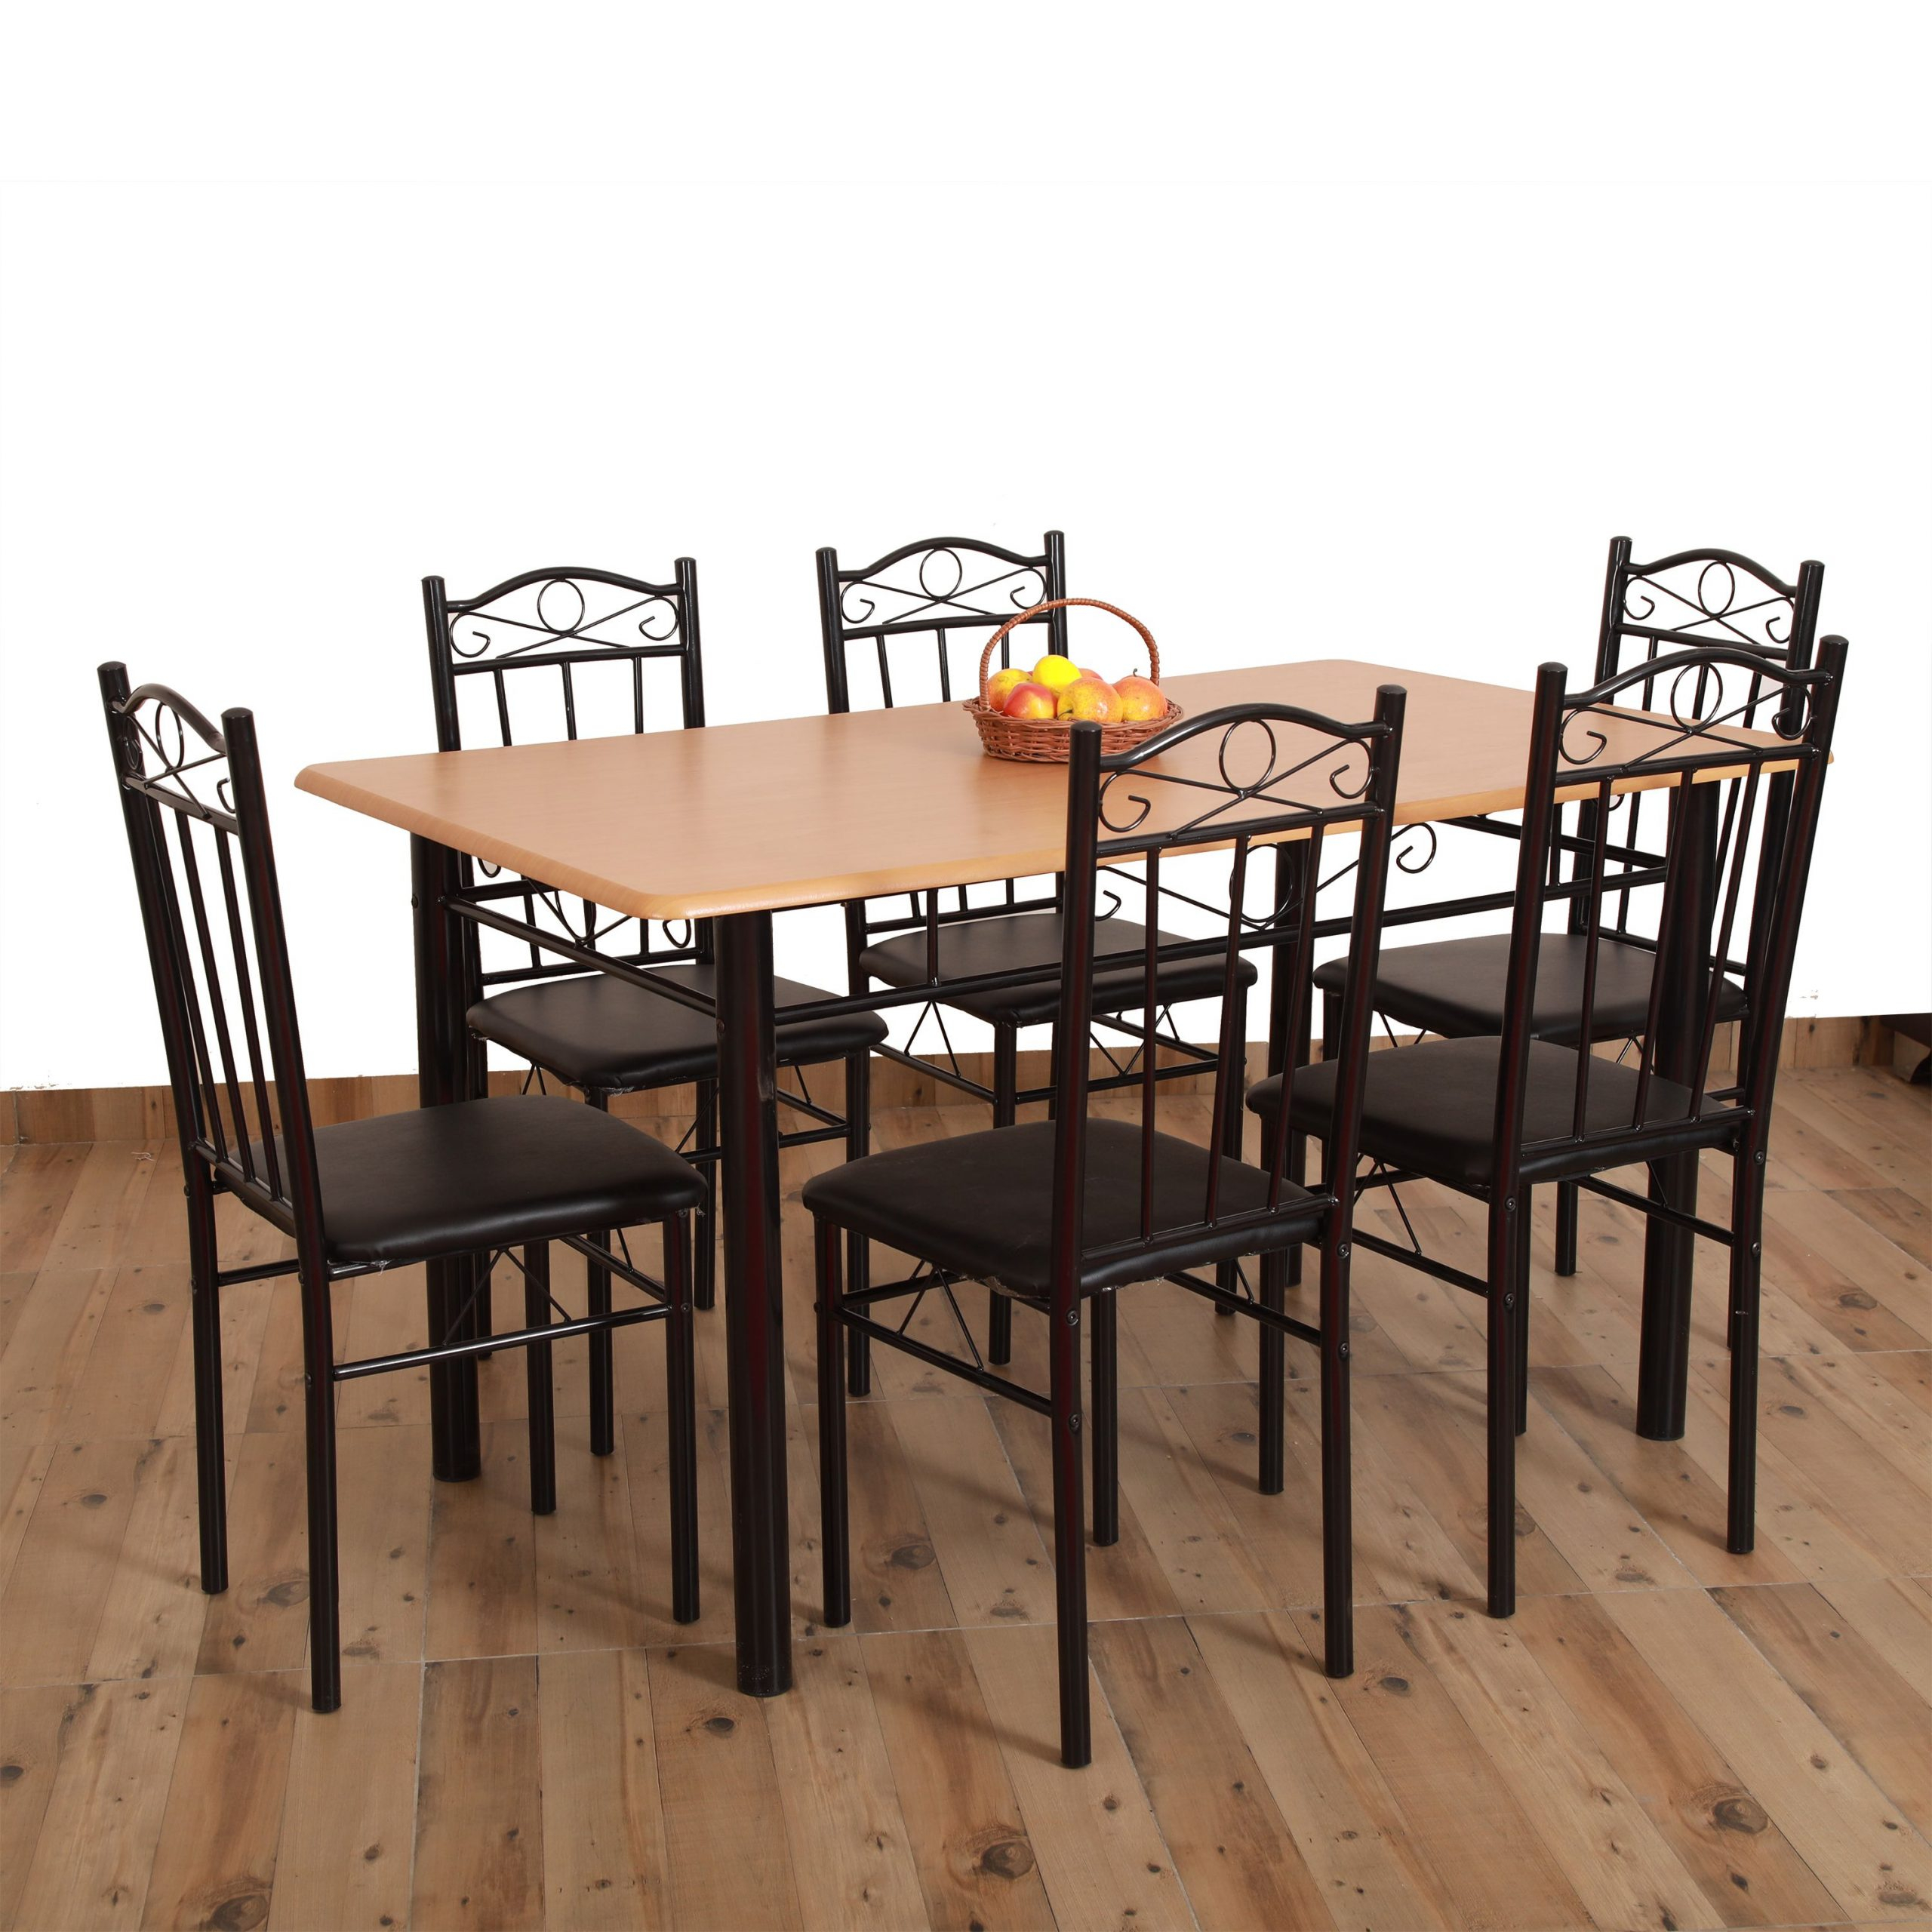 Dining Room Chair Seater Dining Table And Chairs Set Below intended for dimensions 2560 X 2560